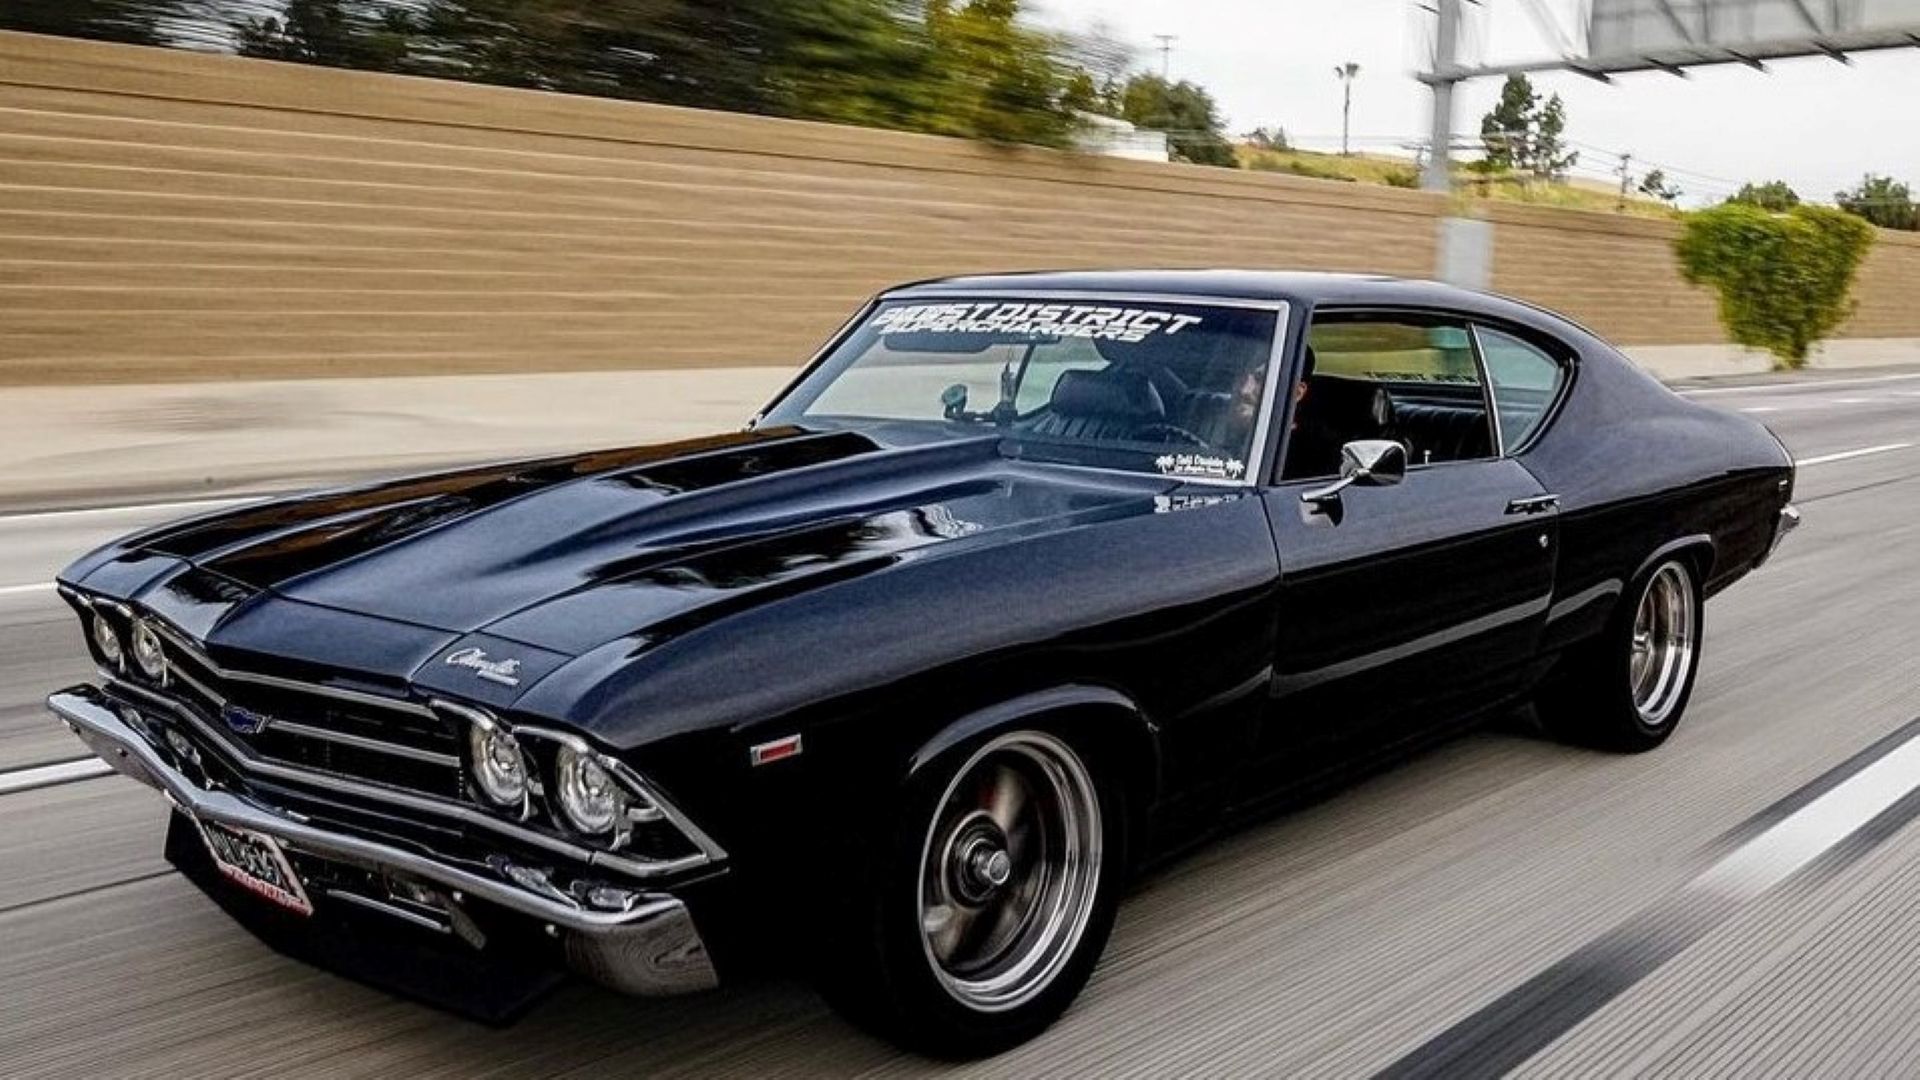 A Side Facing Shot of the Modified 1969 Chevrolet Chevelle Malibu